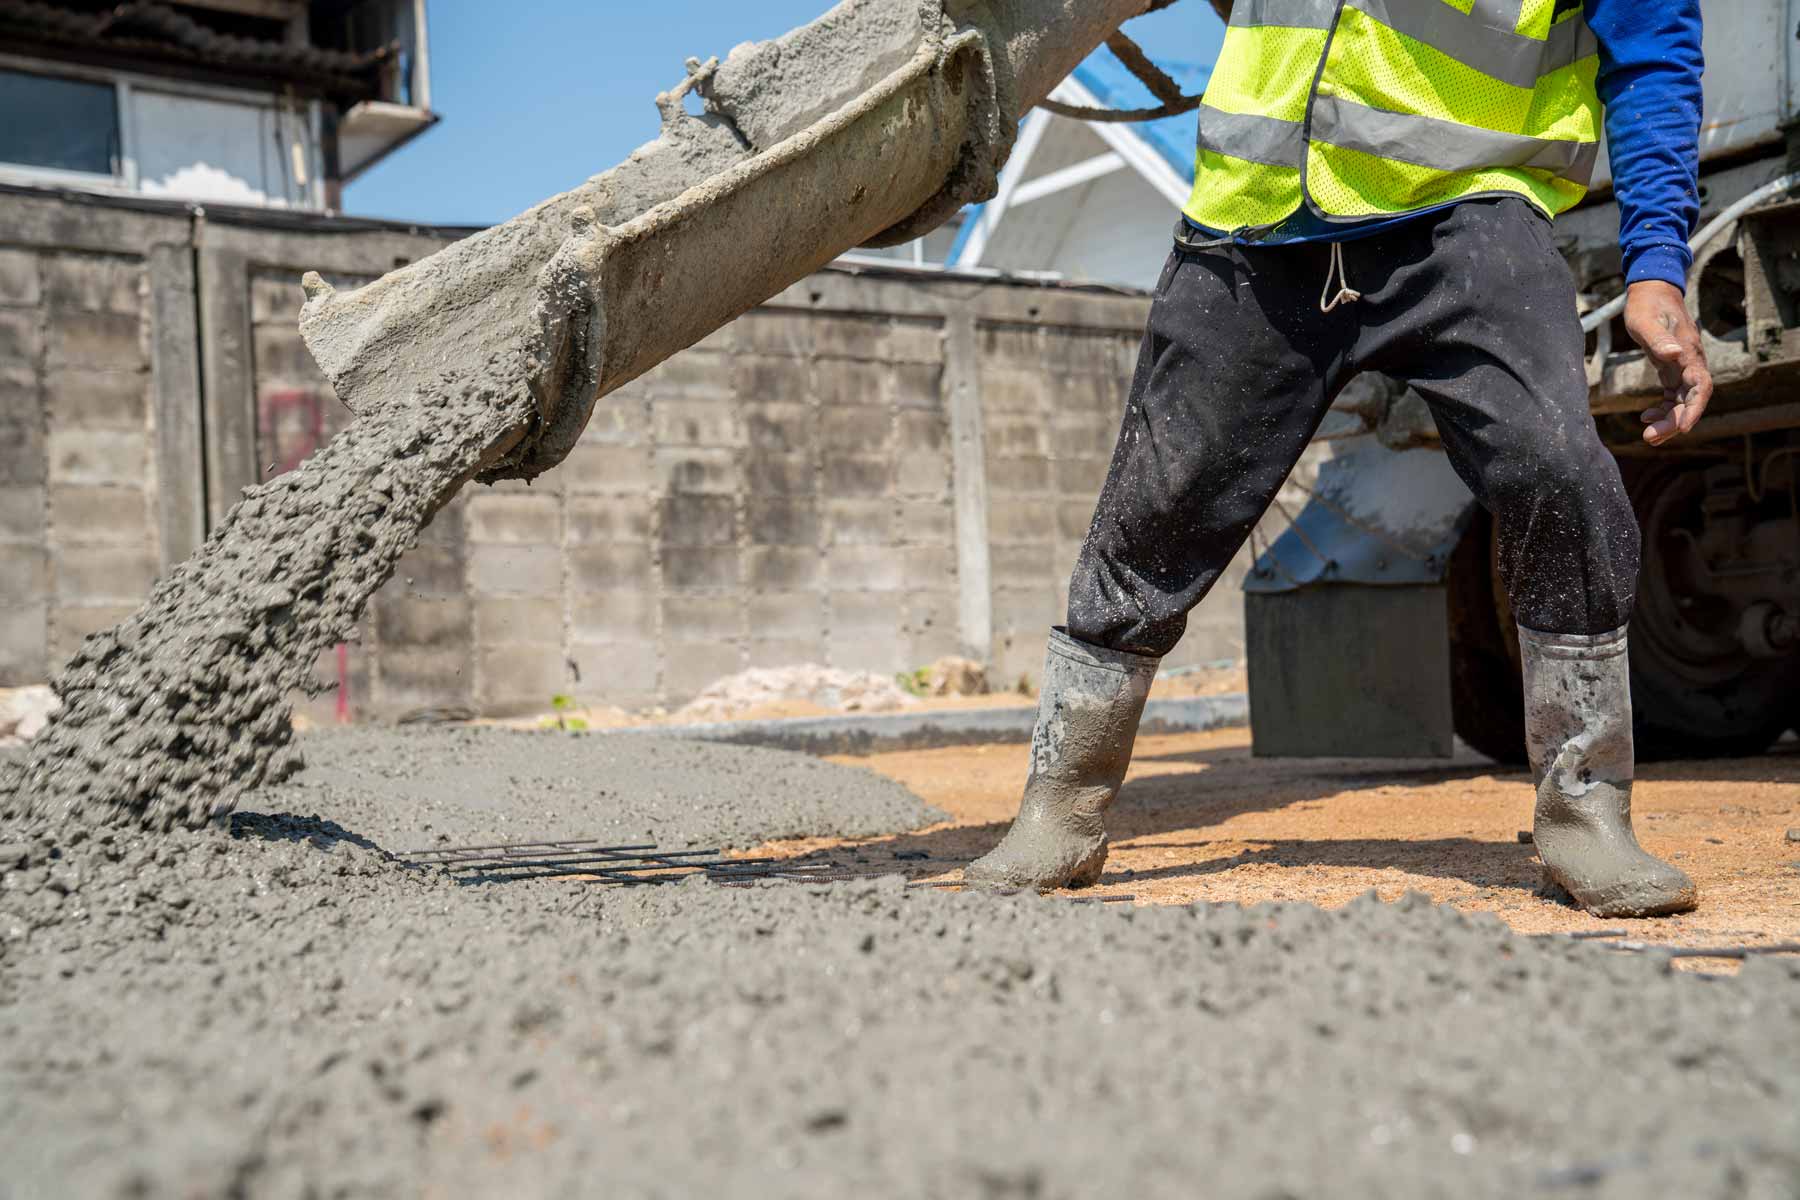 Find a cement company near you